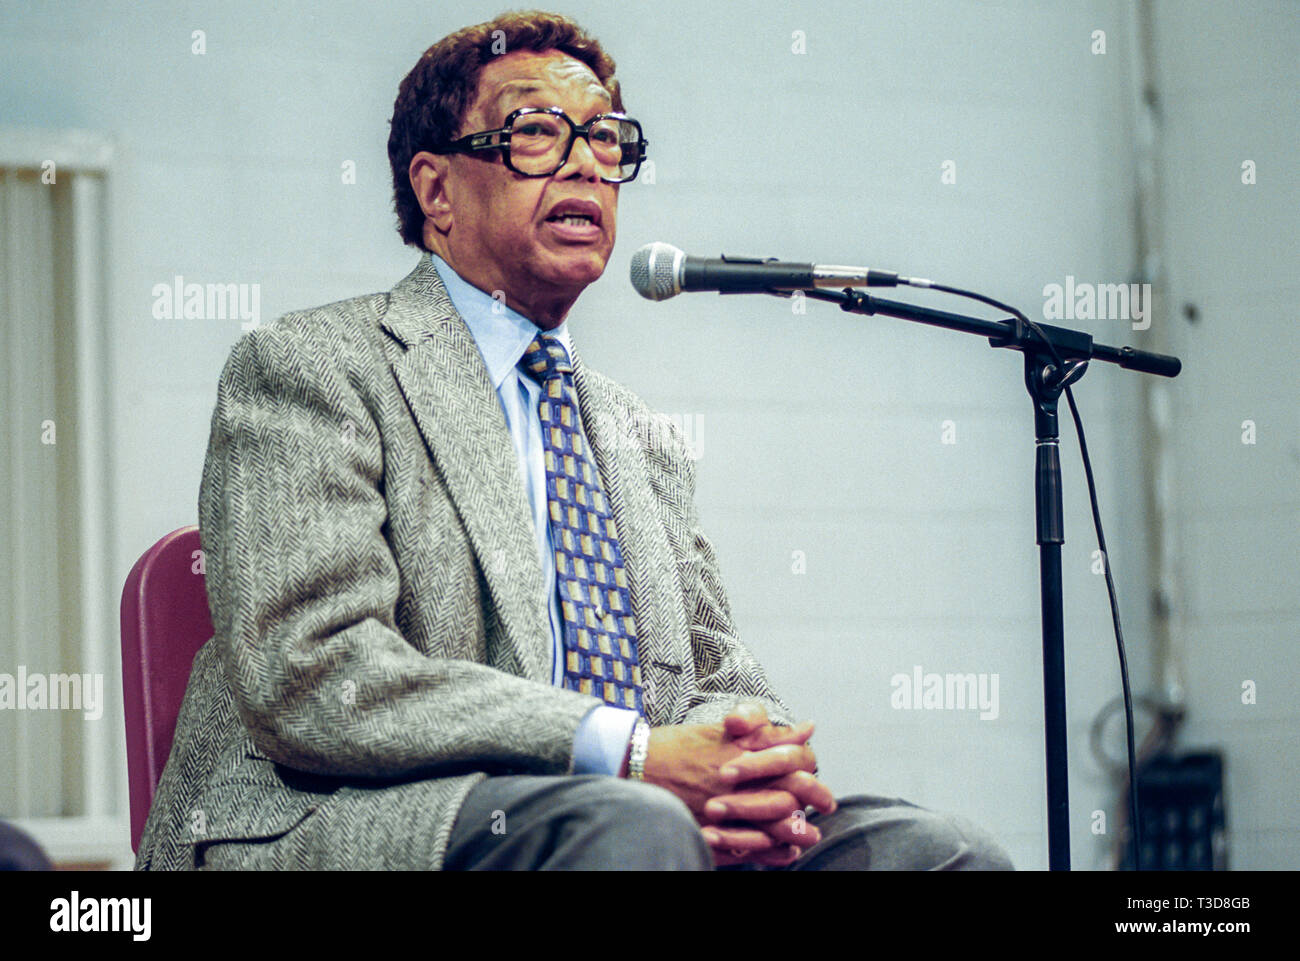 Jazz Pianist Billy Taylor teaches a music class and plays the piano. Stock Photo